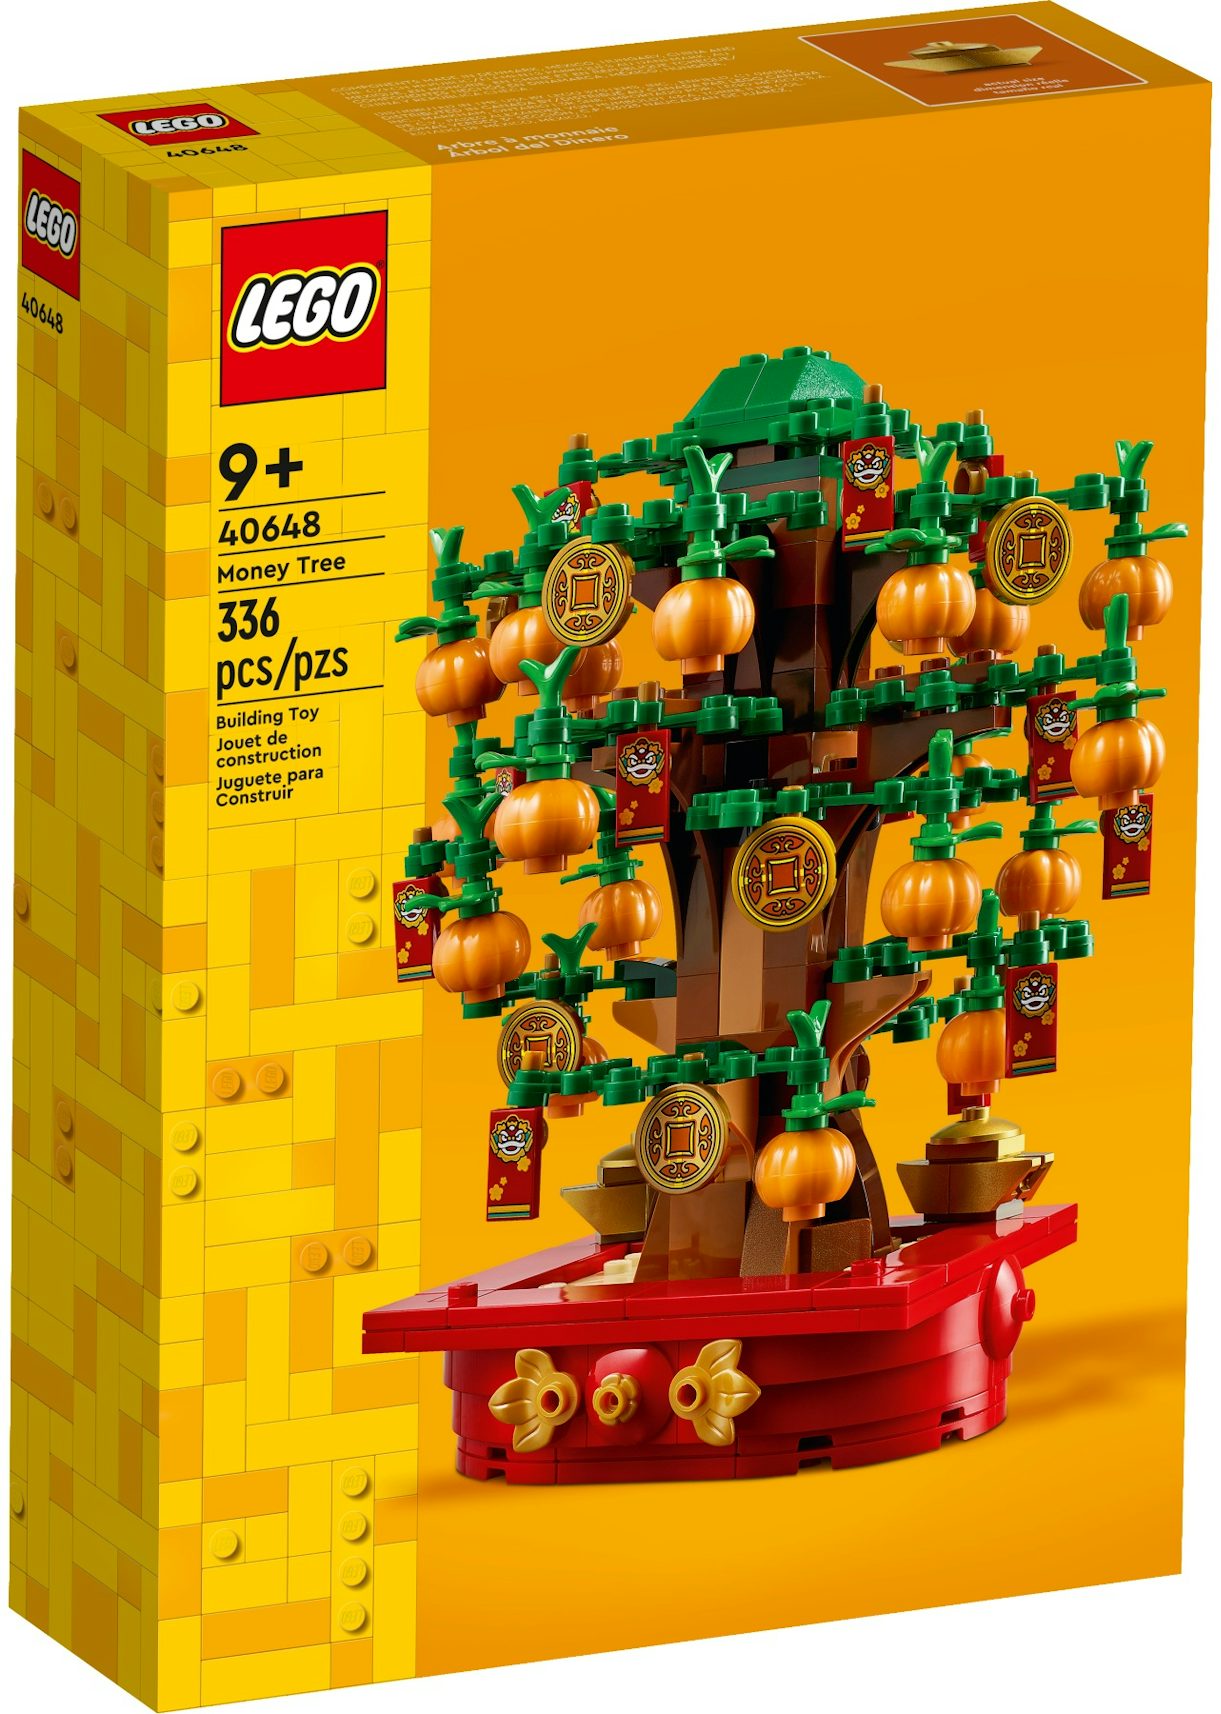 LOUIS VUITTON COLLABORATES WITH MASTER LEGO® BUILDERS FOR THE 2022